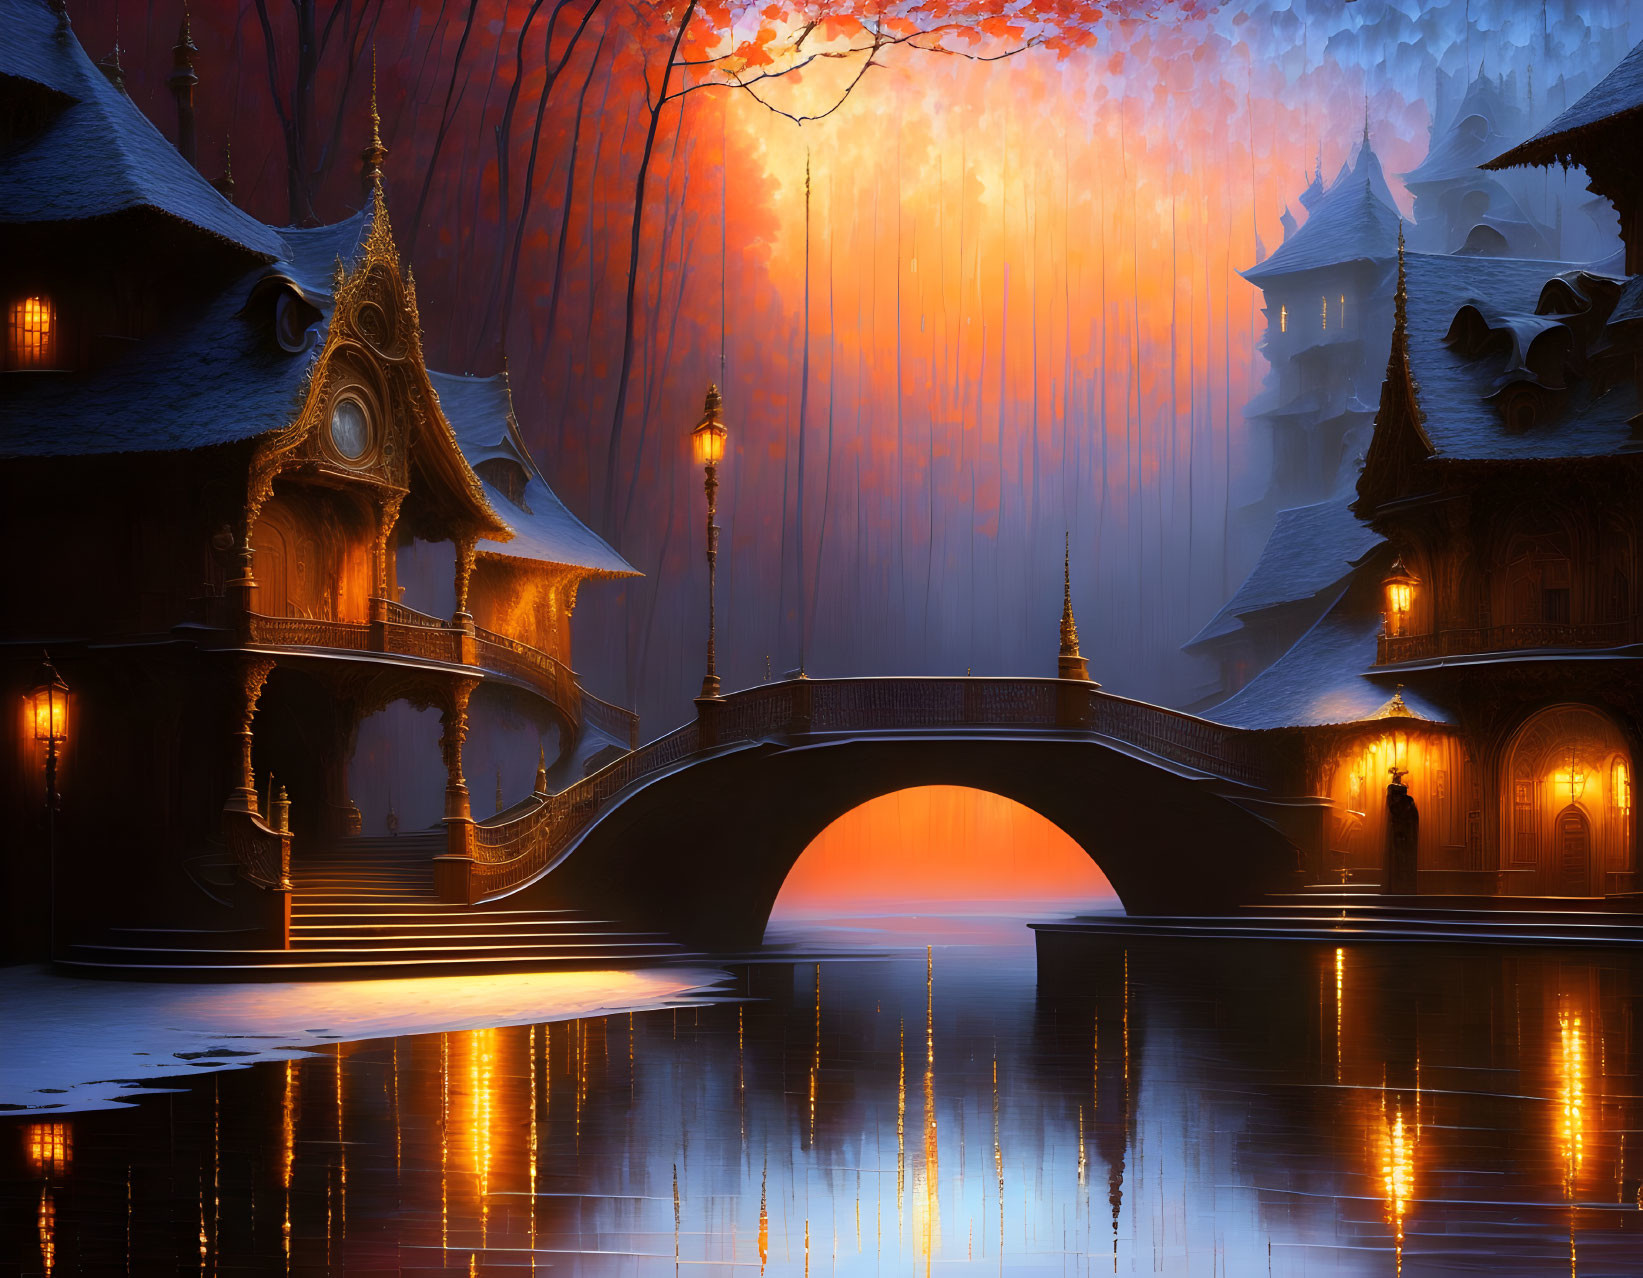 Tranquil fantasy dusk scene with arched bridge and glowing buildings